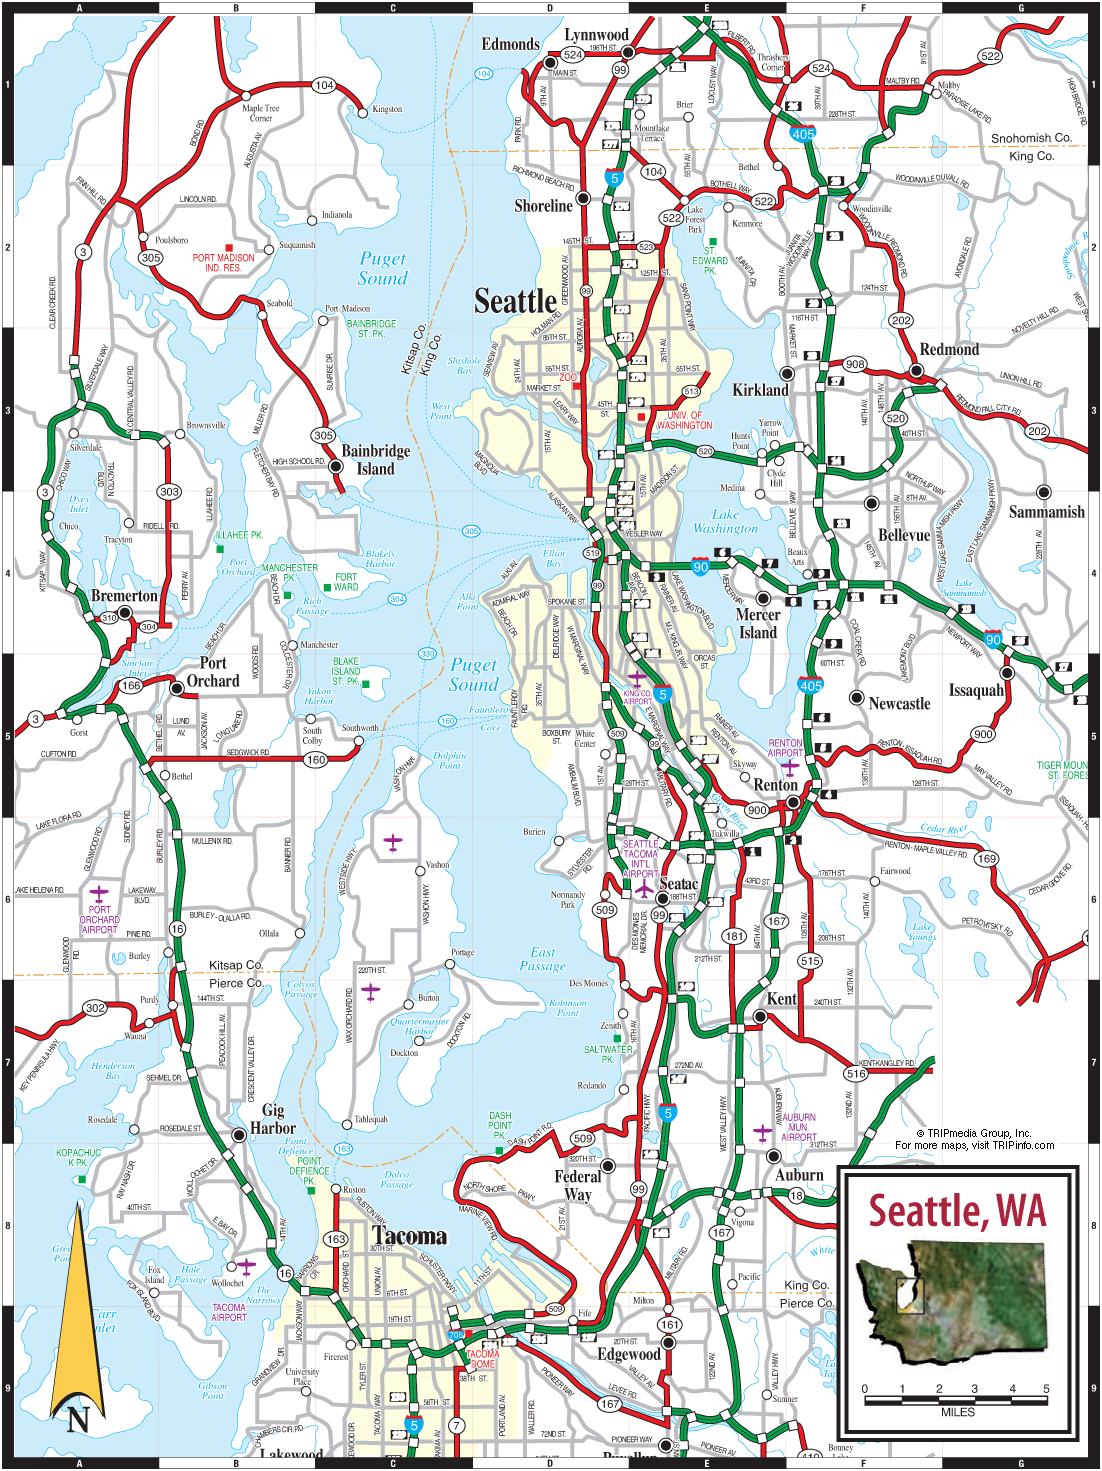 Map of Seattle in Washington State, U.S.A.